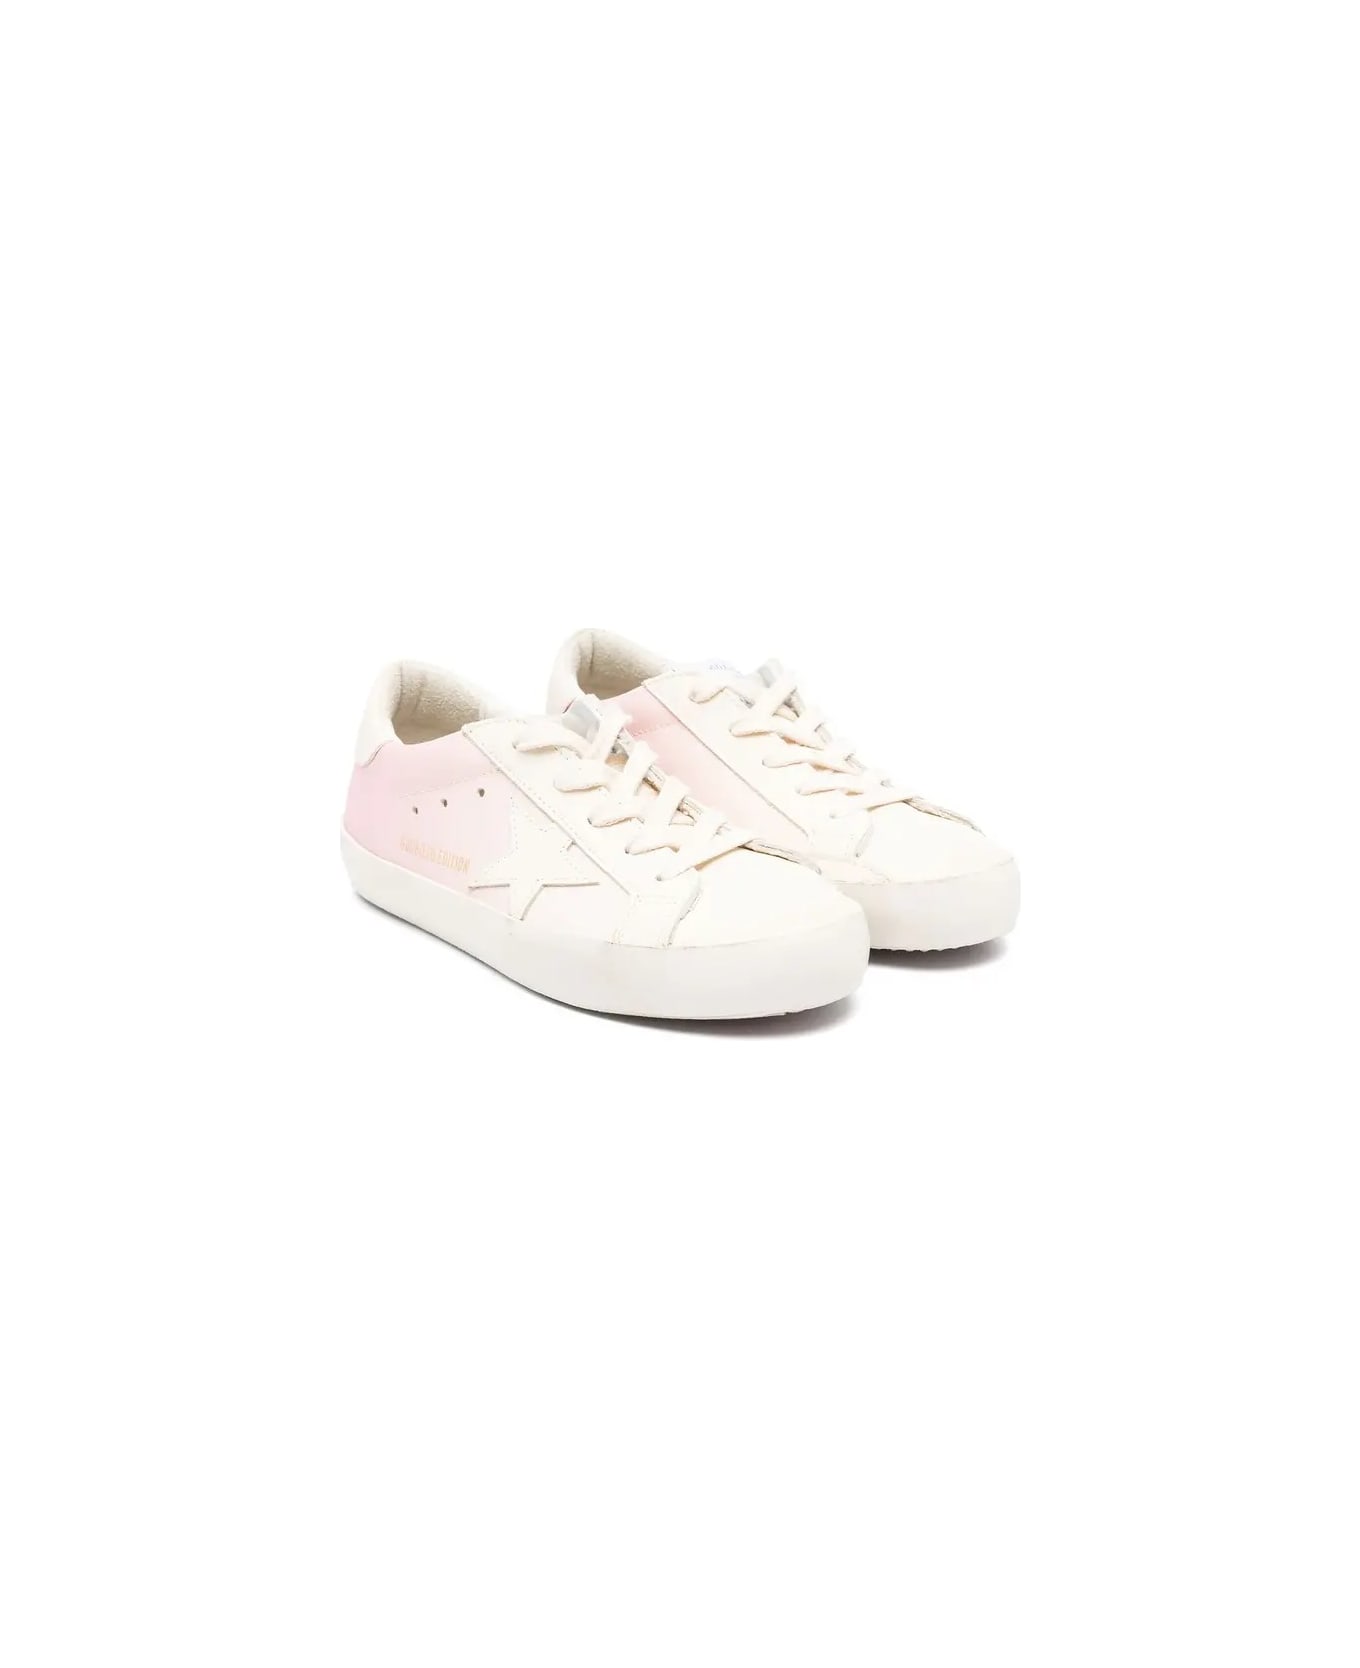 Bonpoint Golden Goose X Bonpoint Sneakers In Strawberry - Pink